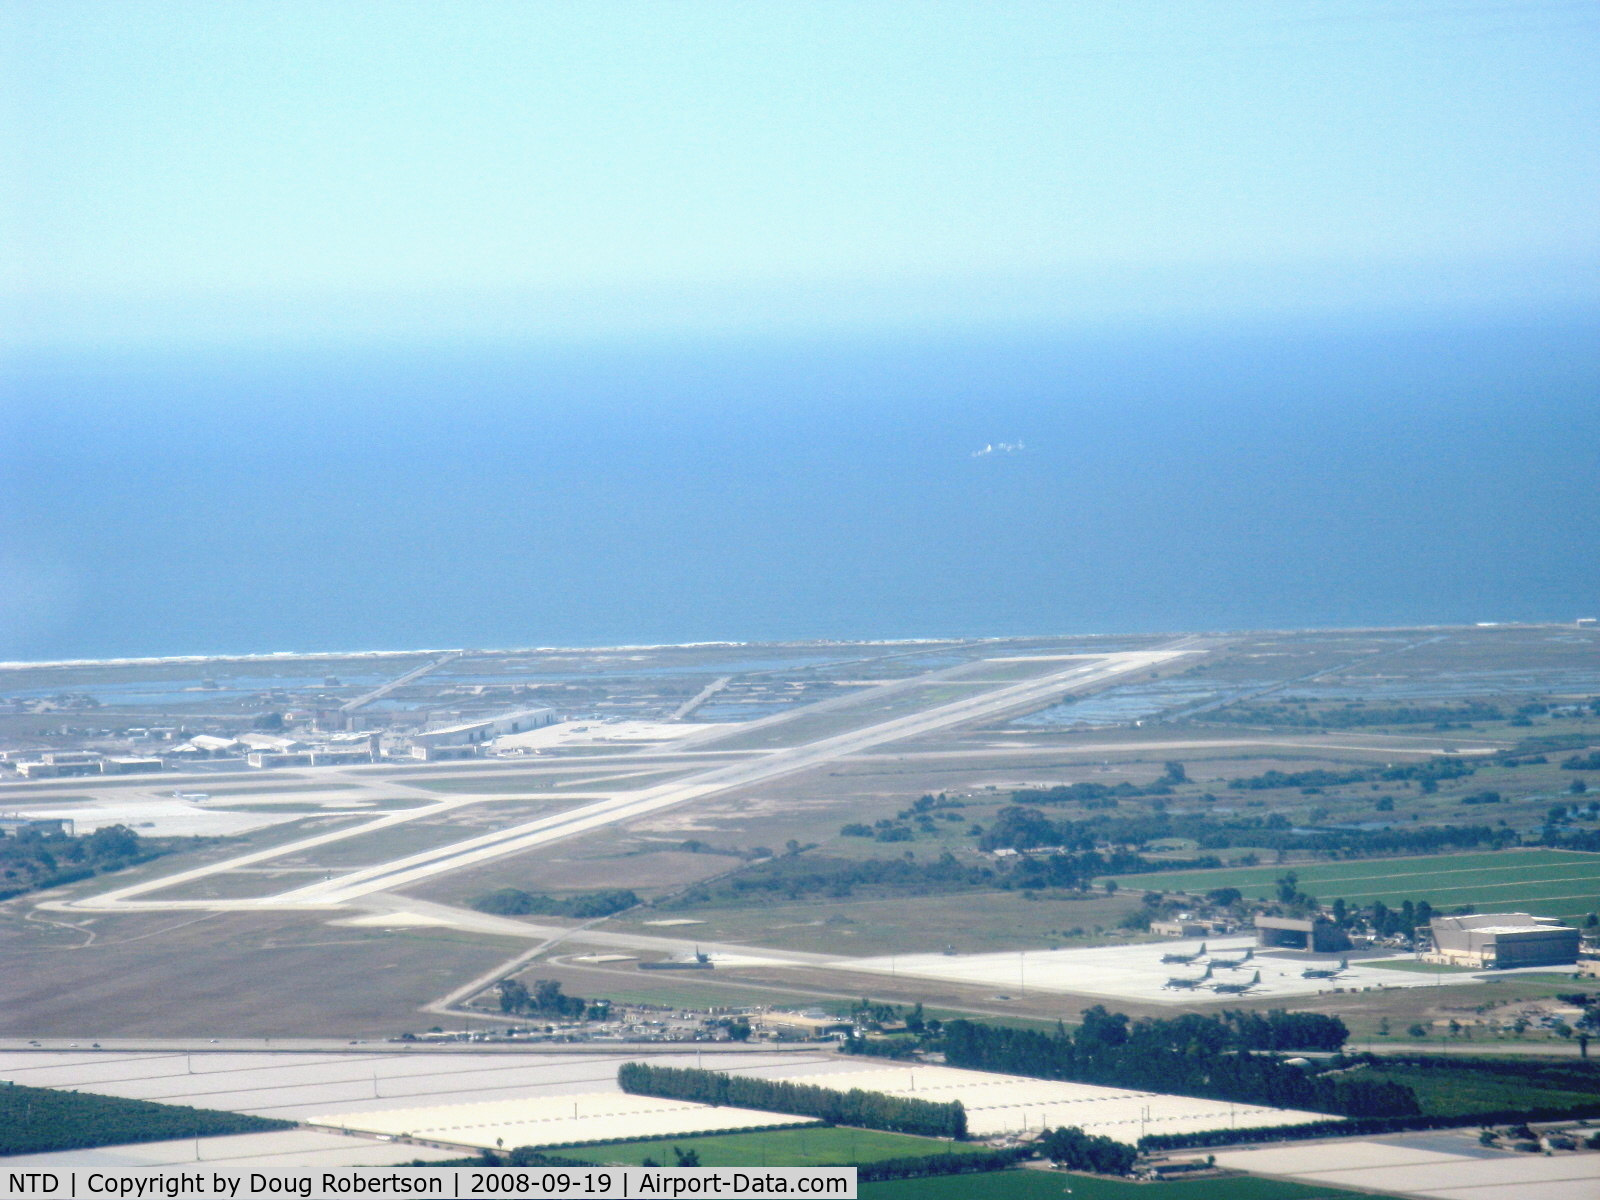 Point Mugu Nas (naval Base Ventura Co) Airport (NTD) - Naval Air Warfare Station, Point Mugu, California. Pacific Ocean beyond. Lower right portion shows Channel Islands Air National Guard taxiway and ramp who shares Pt. Mugu's two runways. Taken from RV-6 N406L.